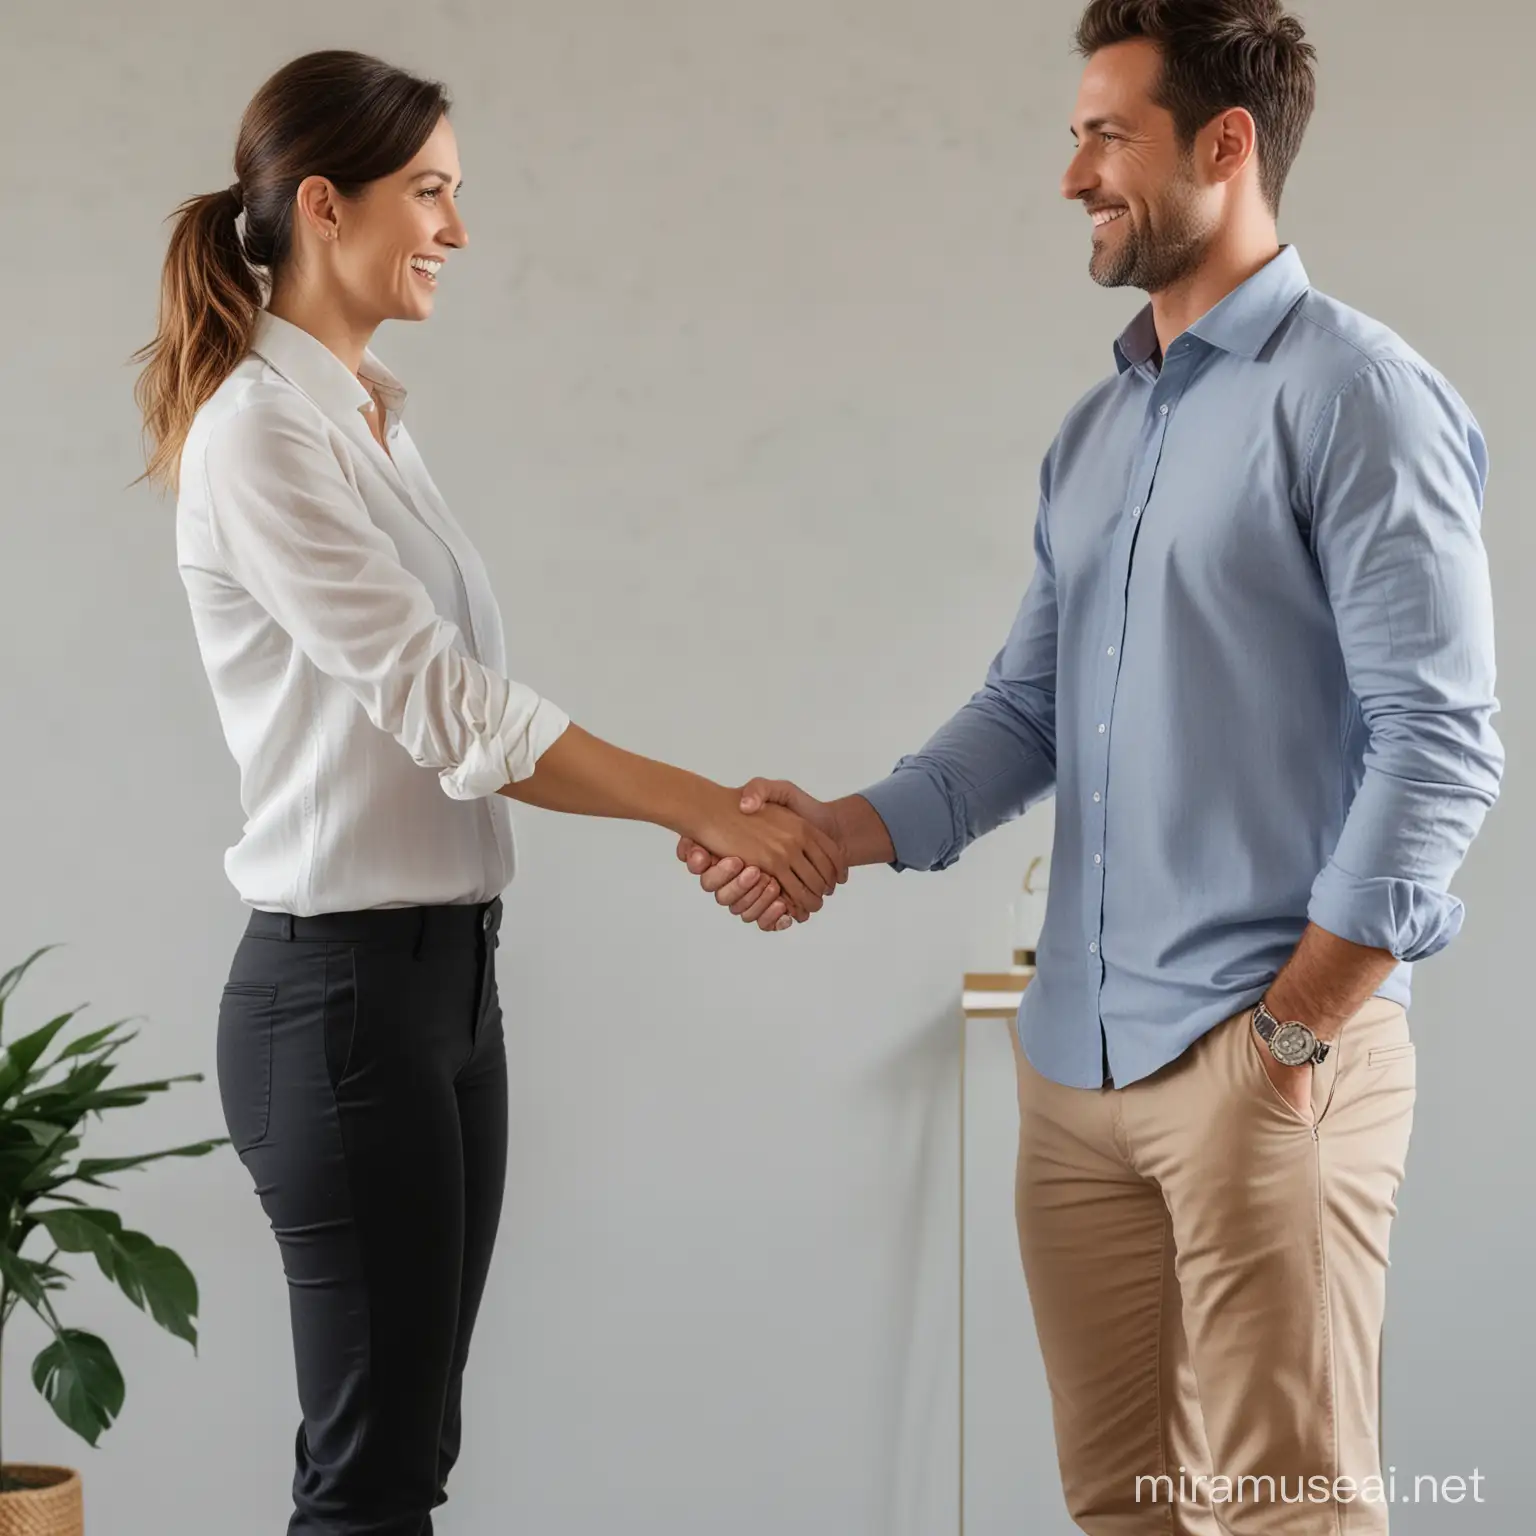 confidant sales woman in New Zealand and male business owner, casually dressed, shaking hands 